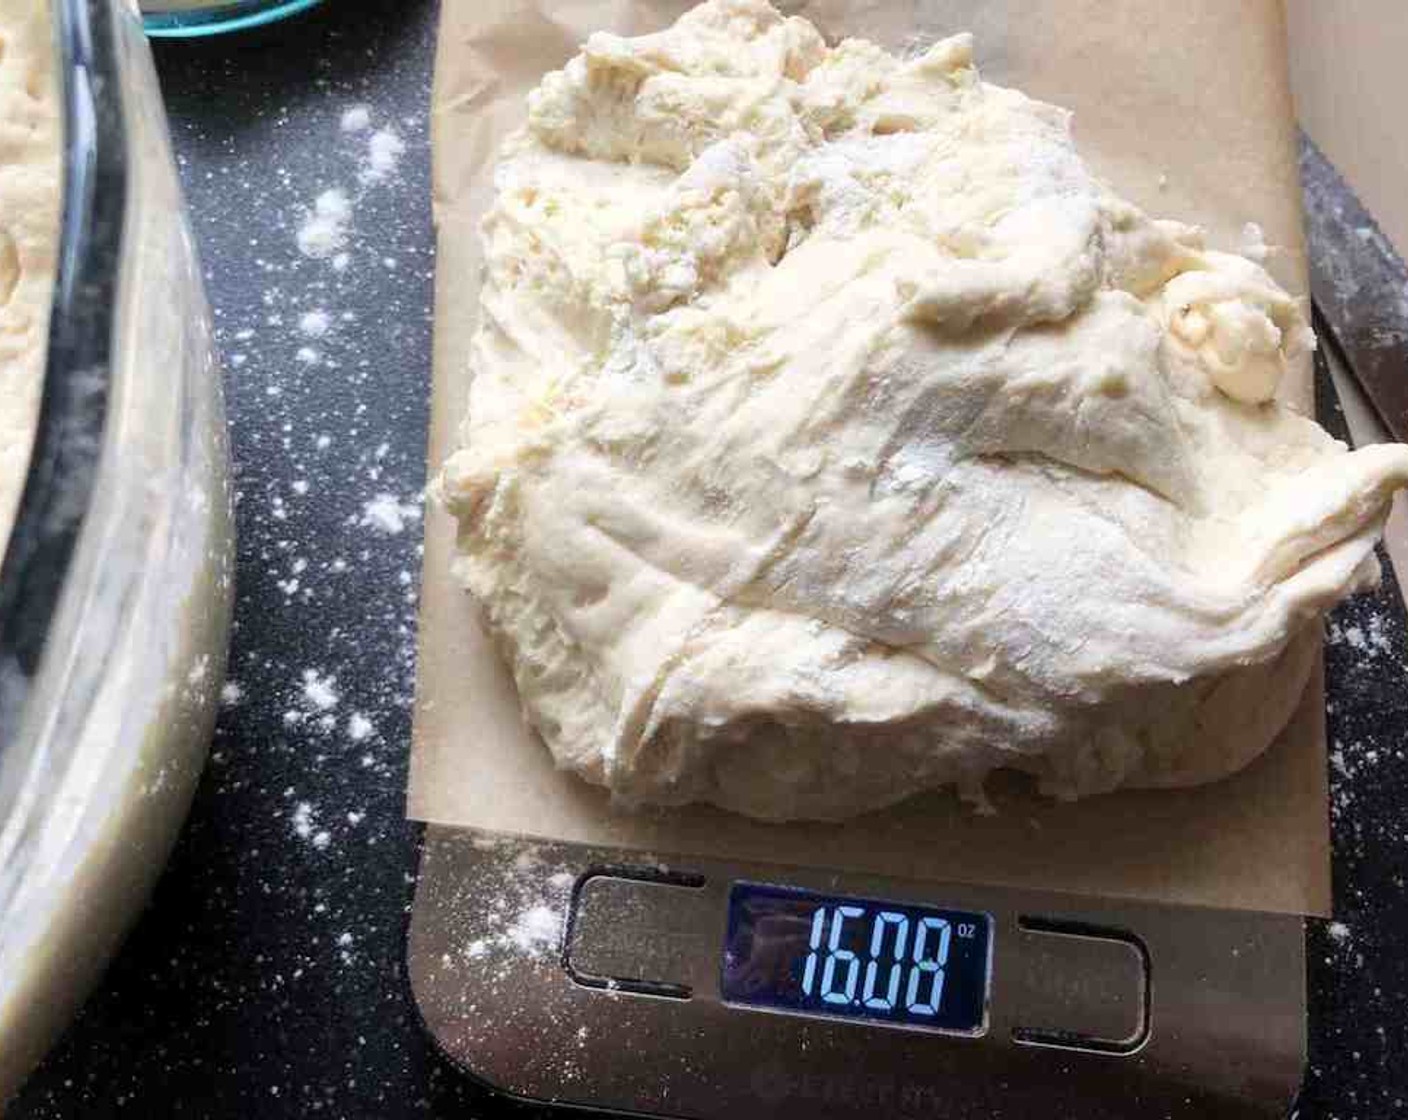 step 5 Grab that refrigerated container of prepared dough and sprinkle the surface of the dough with flour. Pull up and cut off a piece of dough weighing about 16 oz.